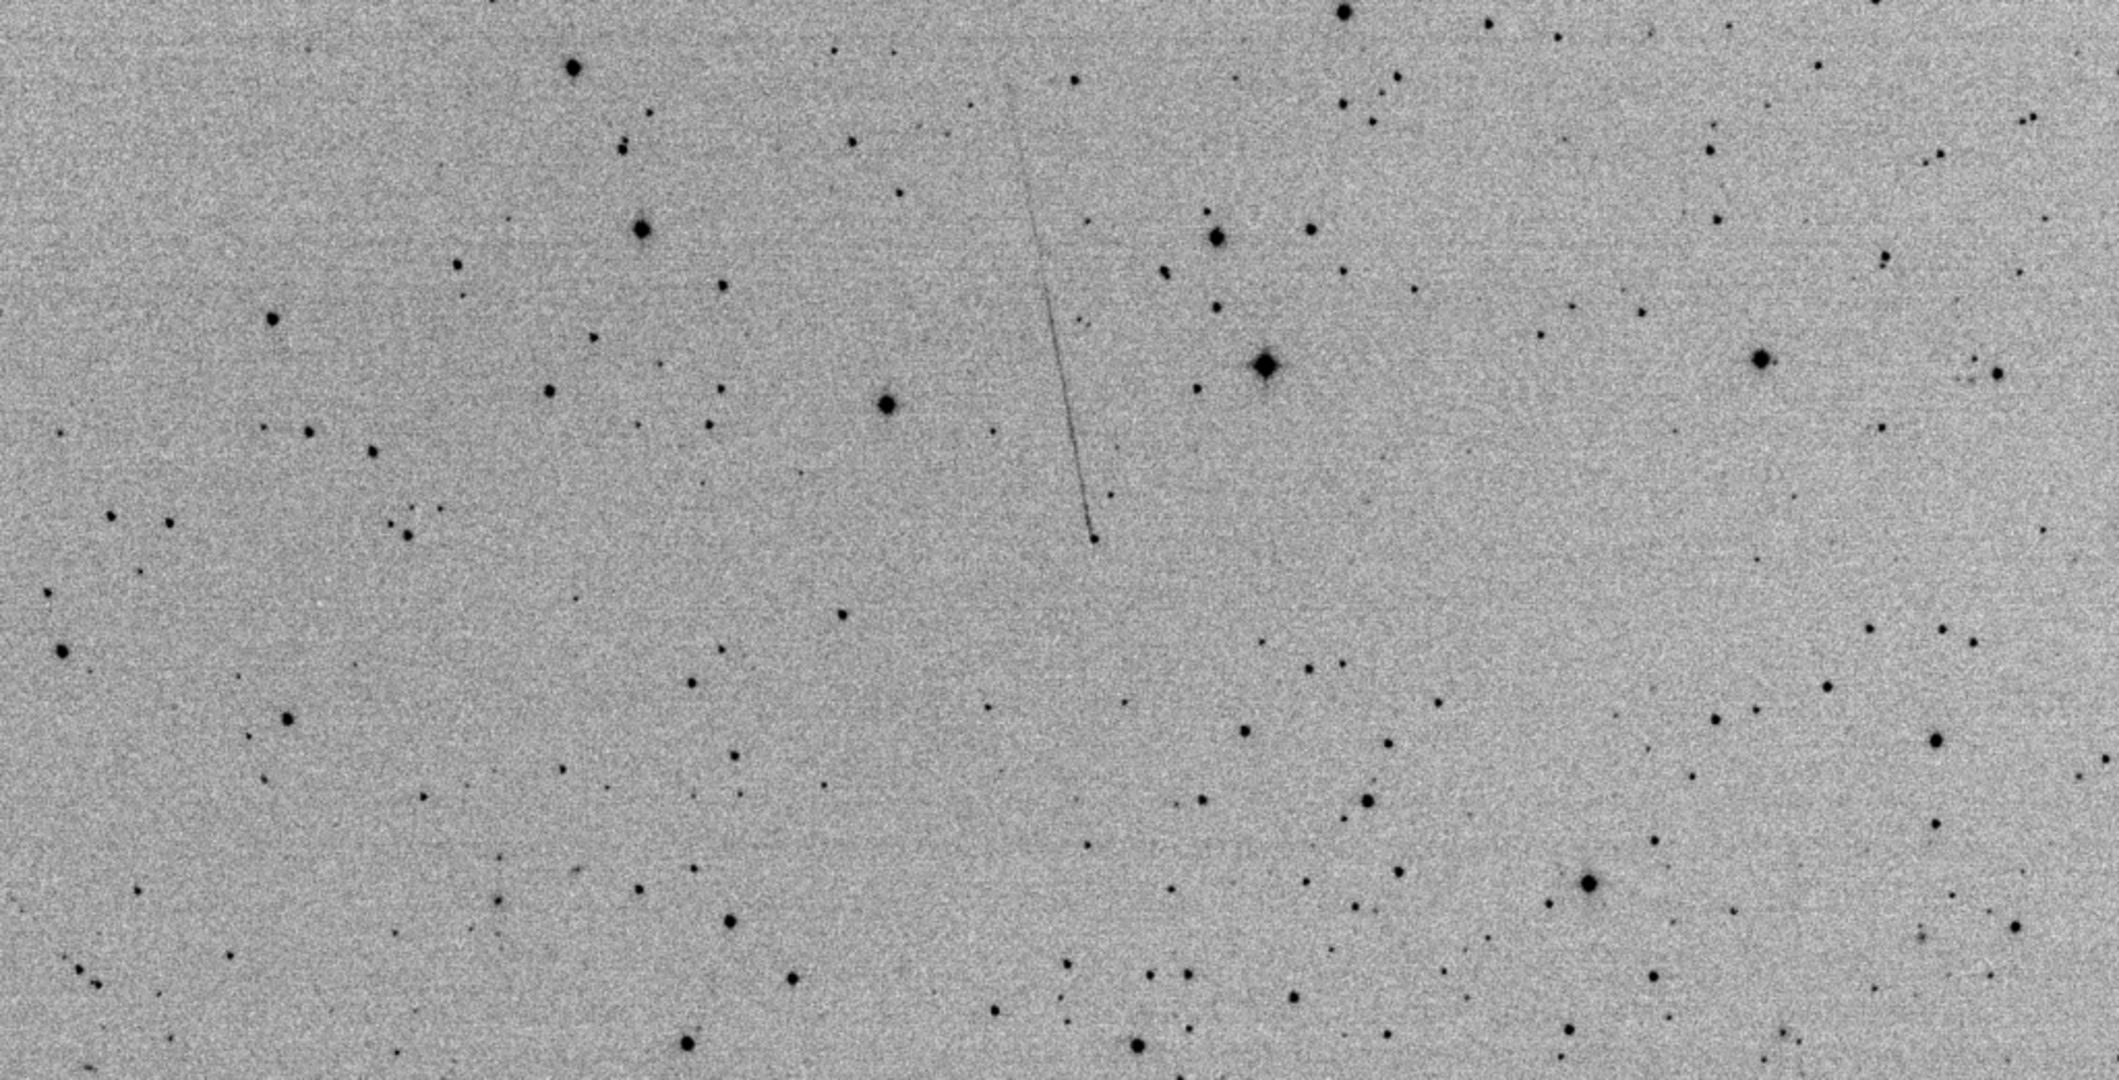 Asteroid 2024 BX1 tracked prior to impact